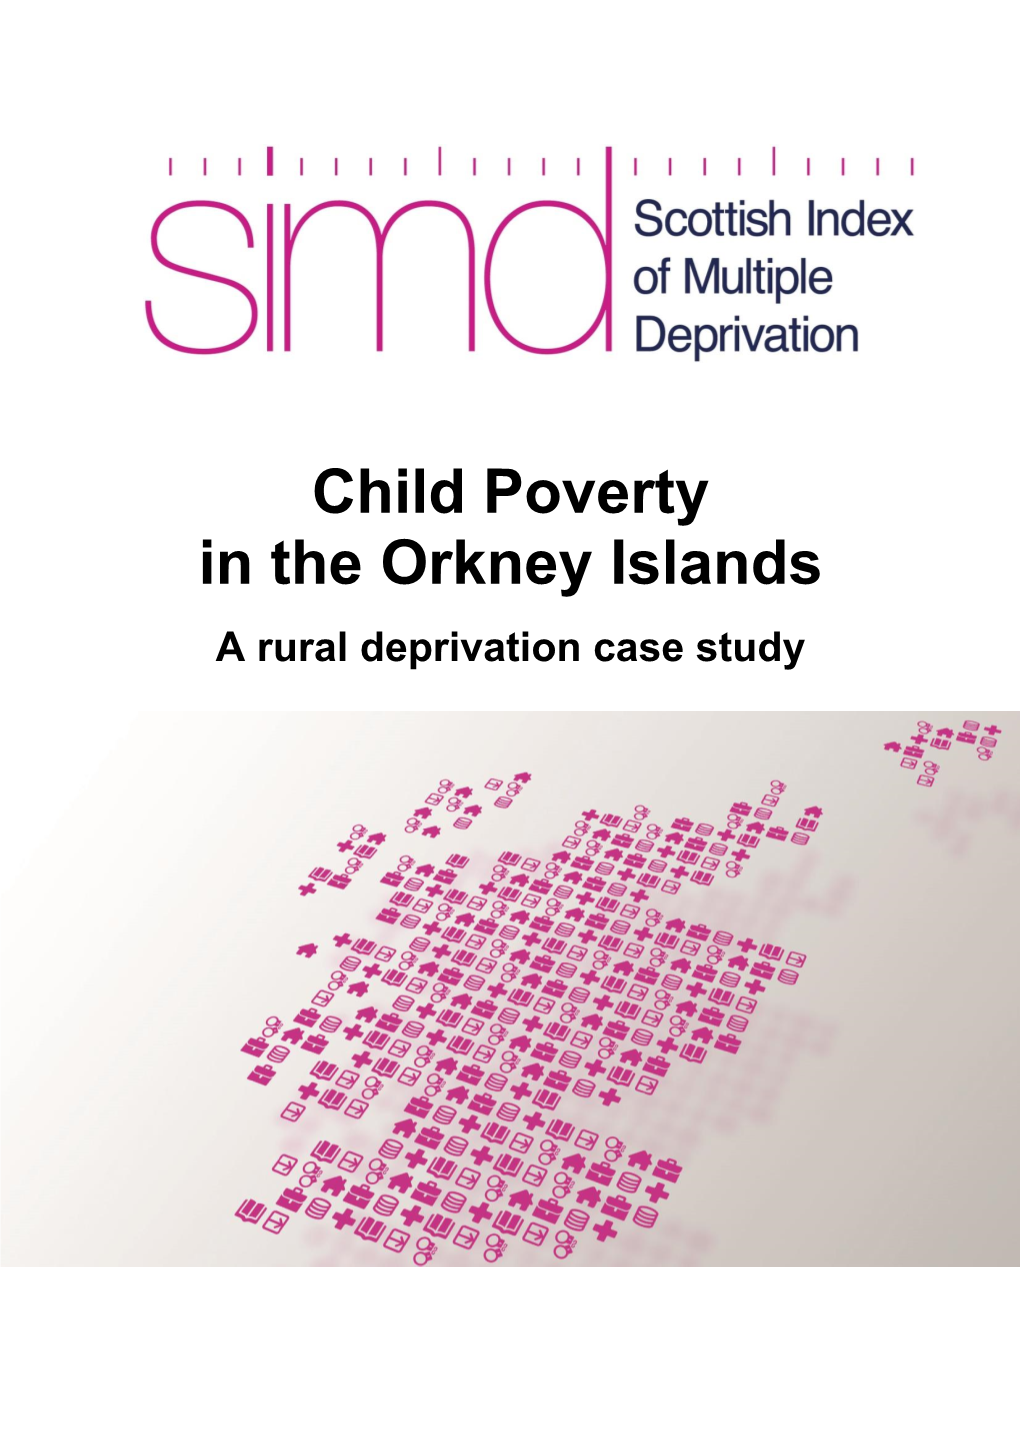 Child Poverty in the Orkney Islands